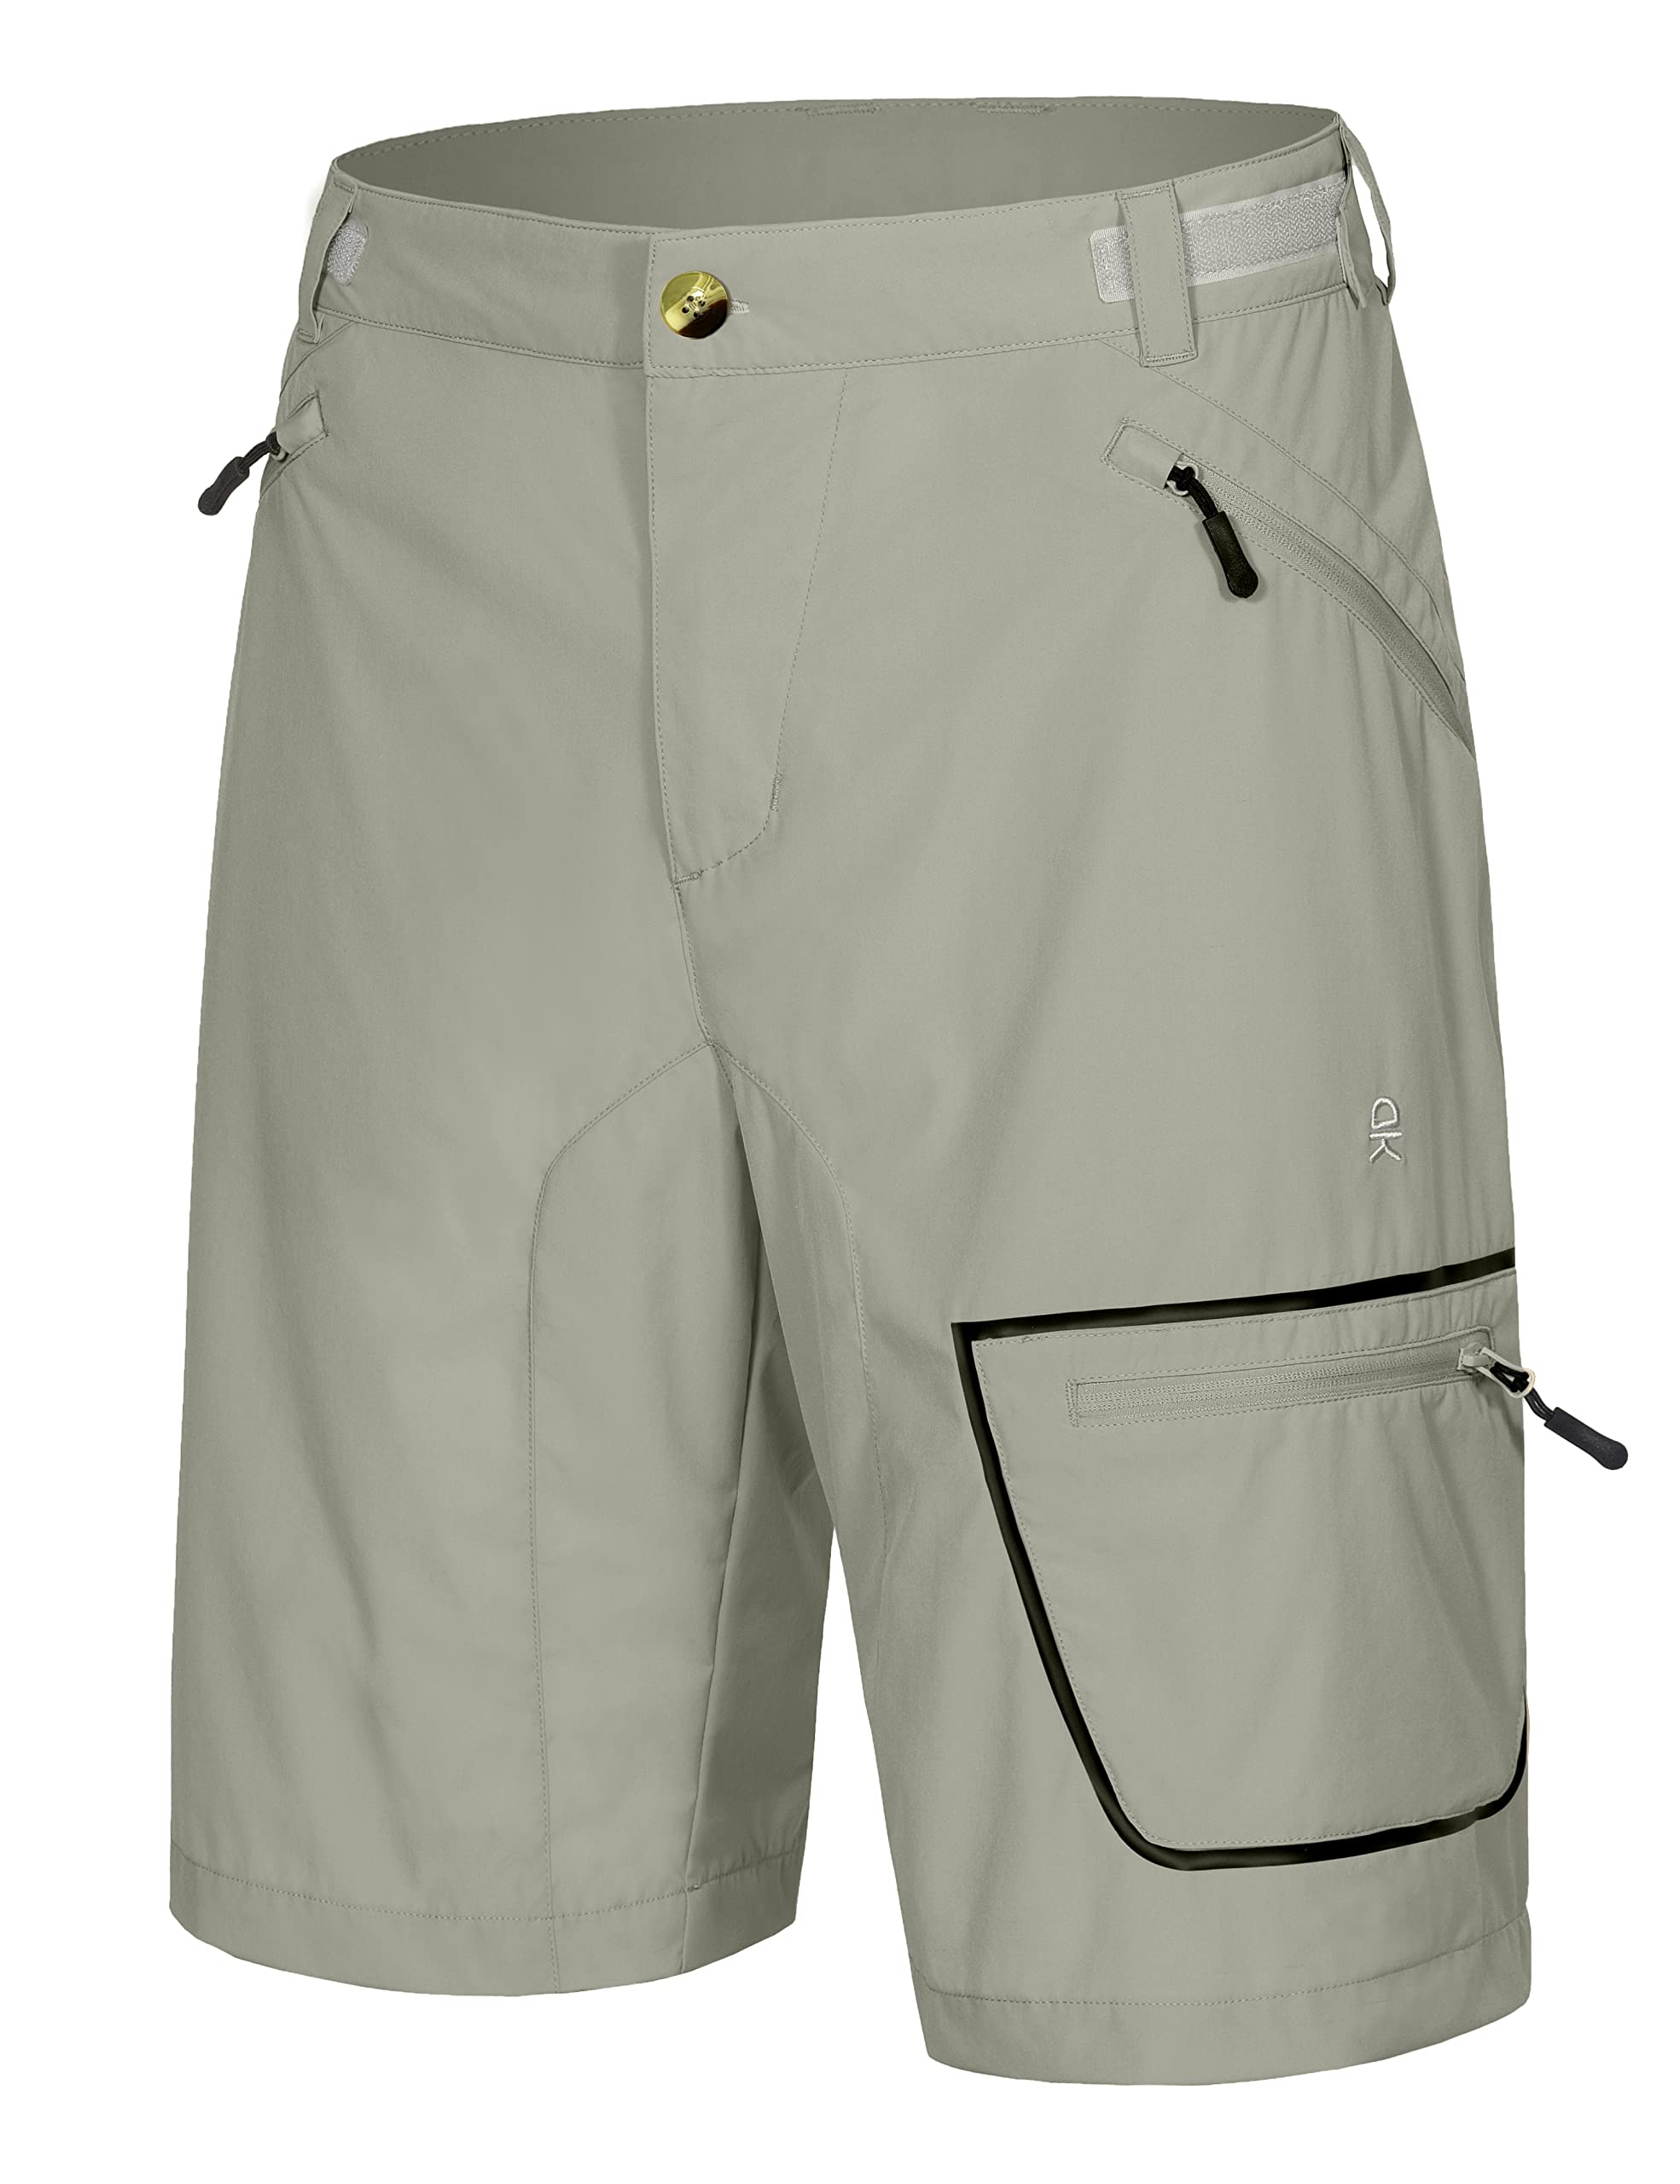 Little Donkey Andy Men's Lightweight Quick Dry Hiking Shorts